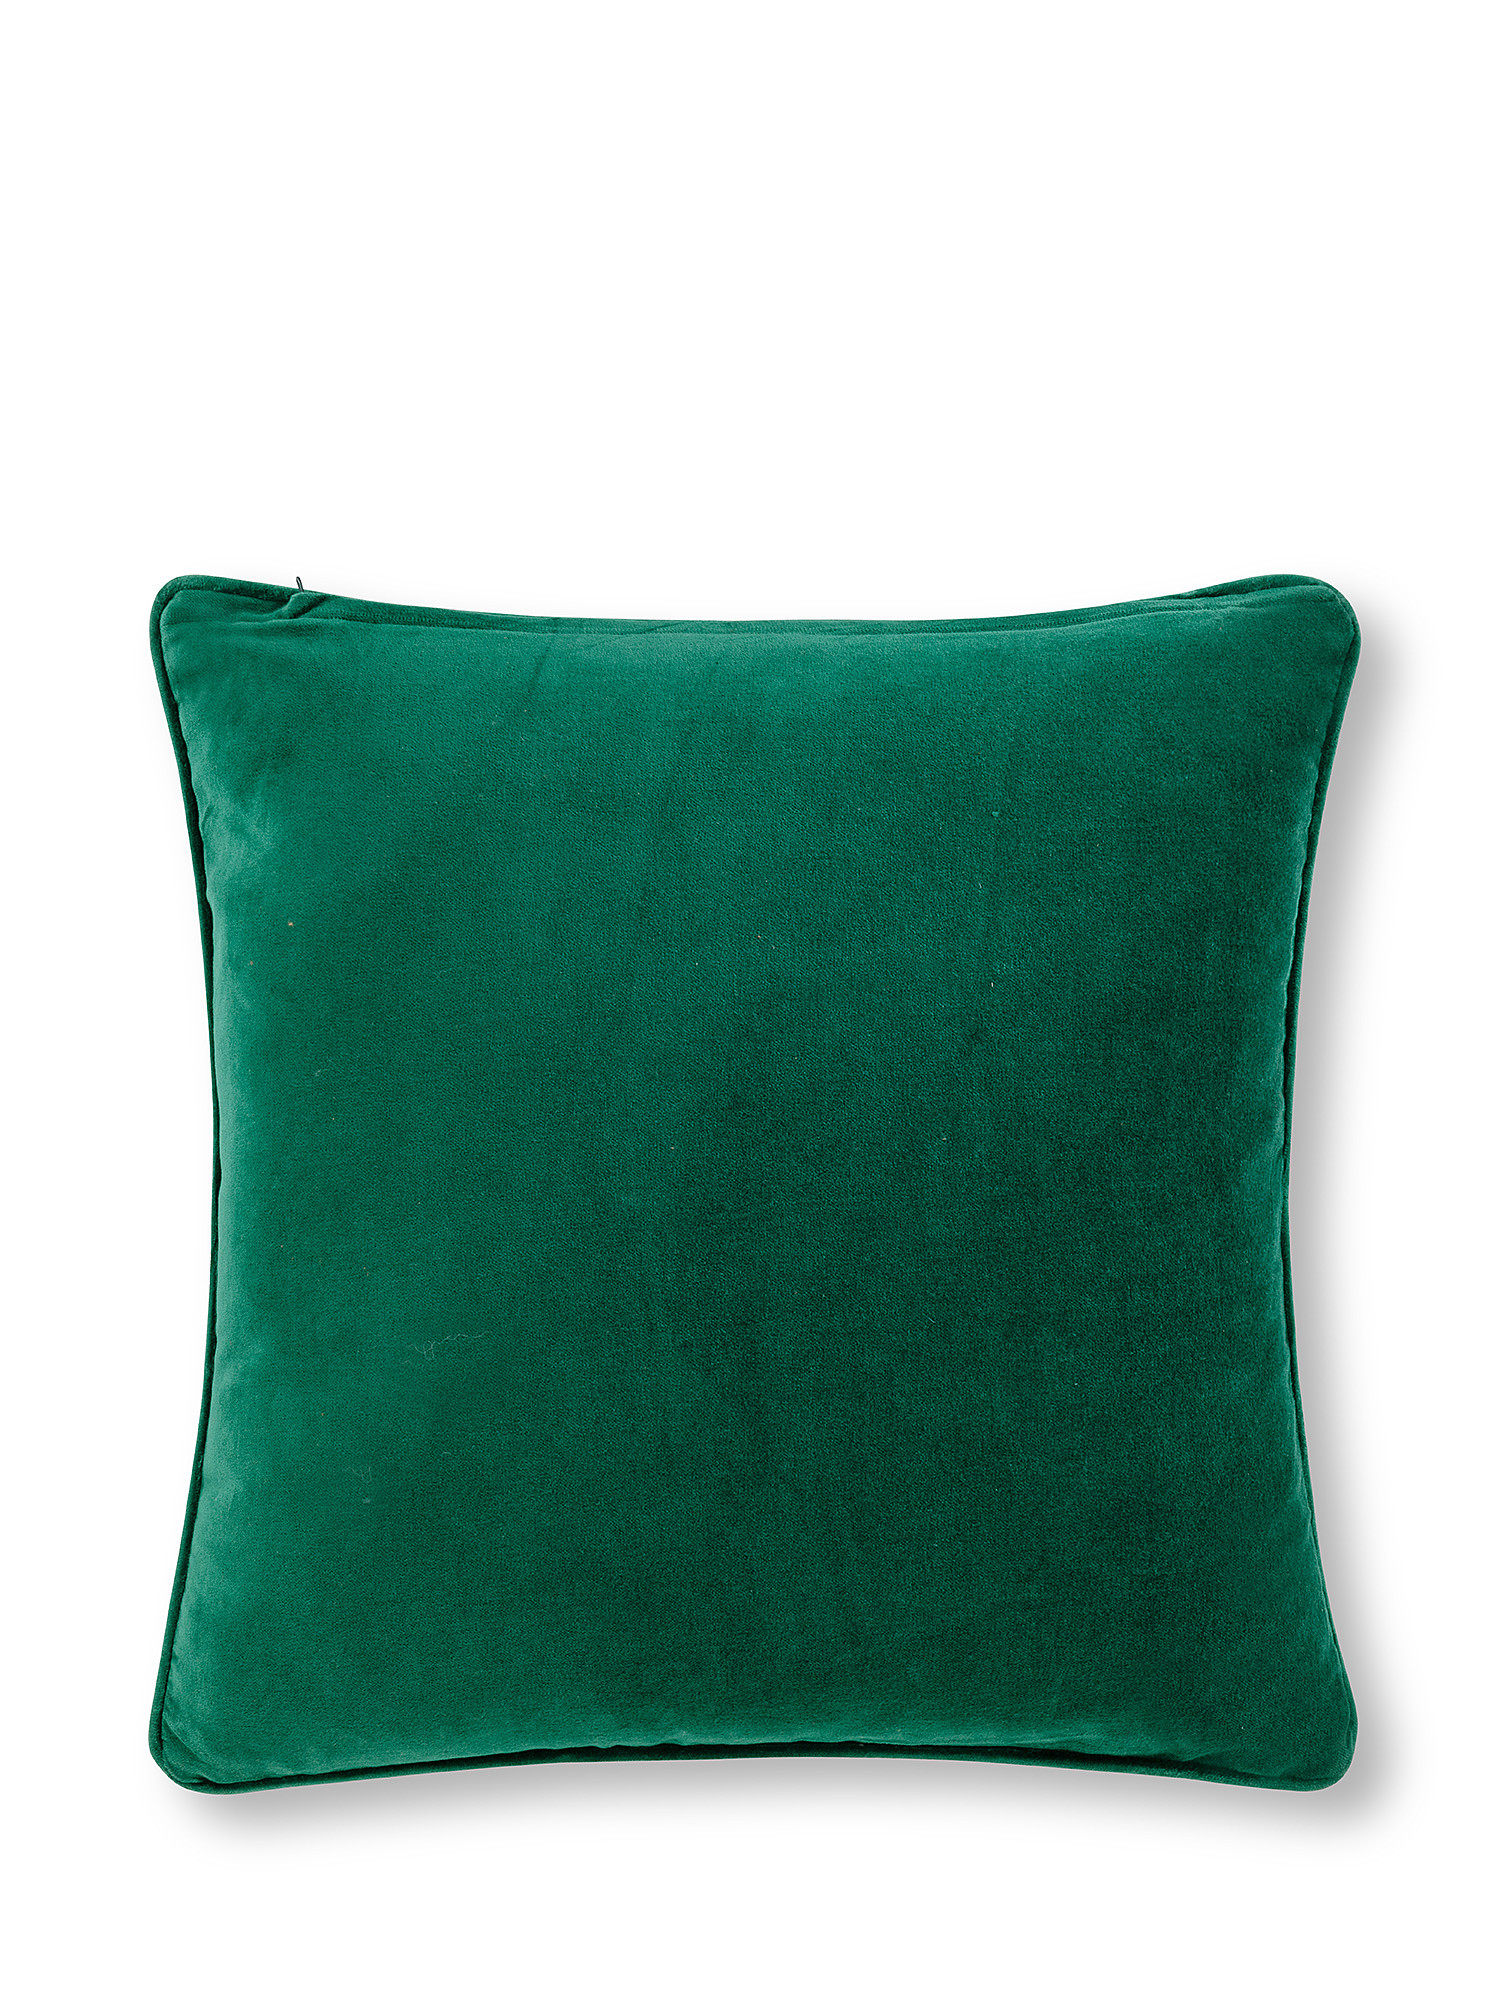 Velvet cushion with flower embroidery 45x45cm, Green, large image number 1